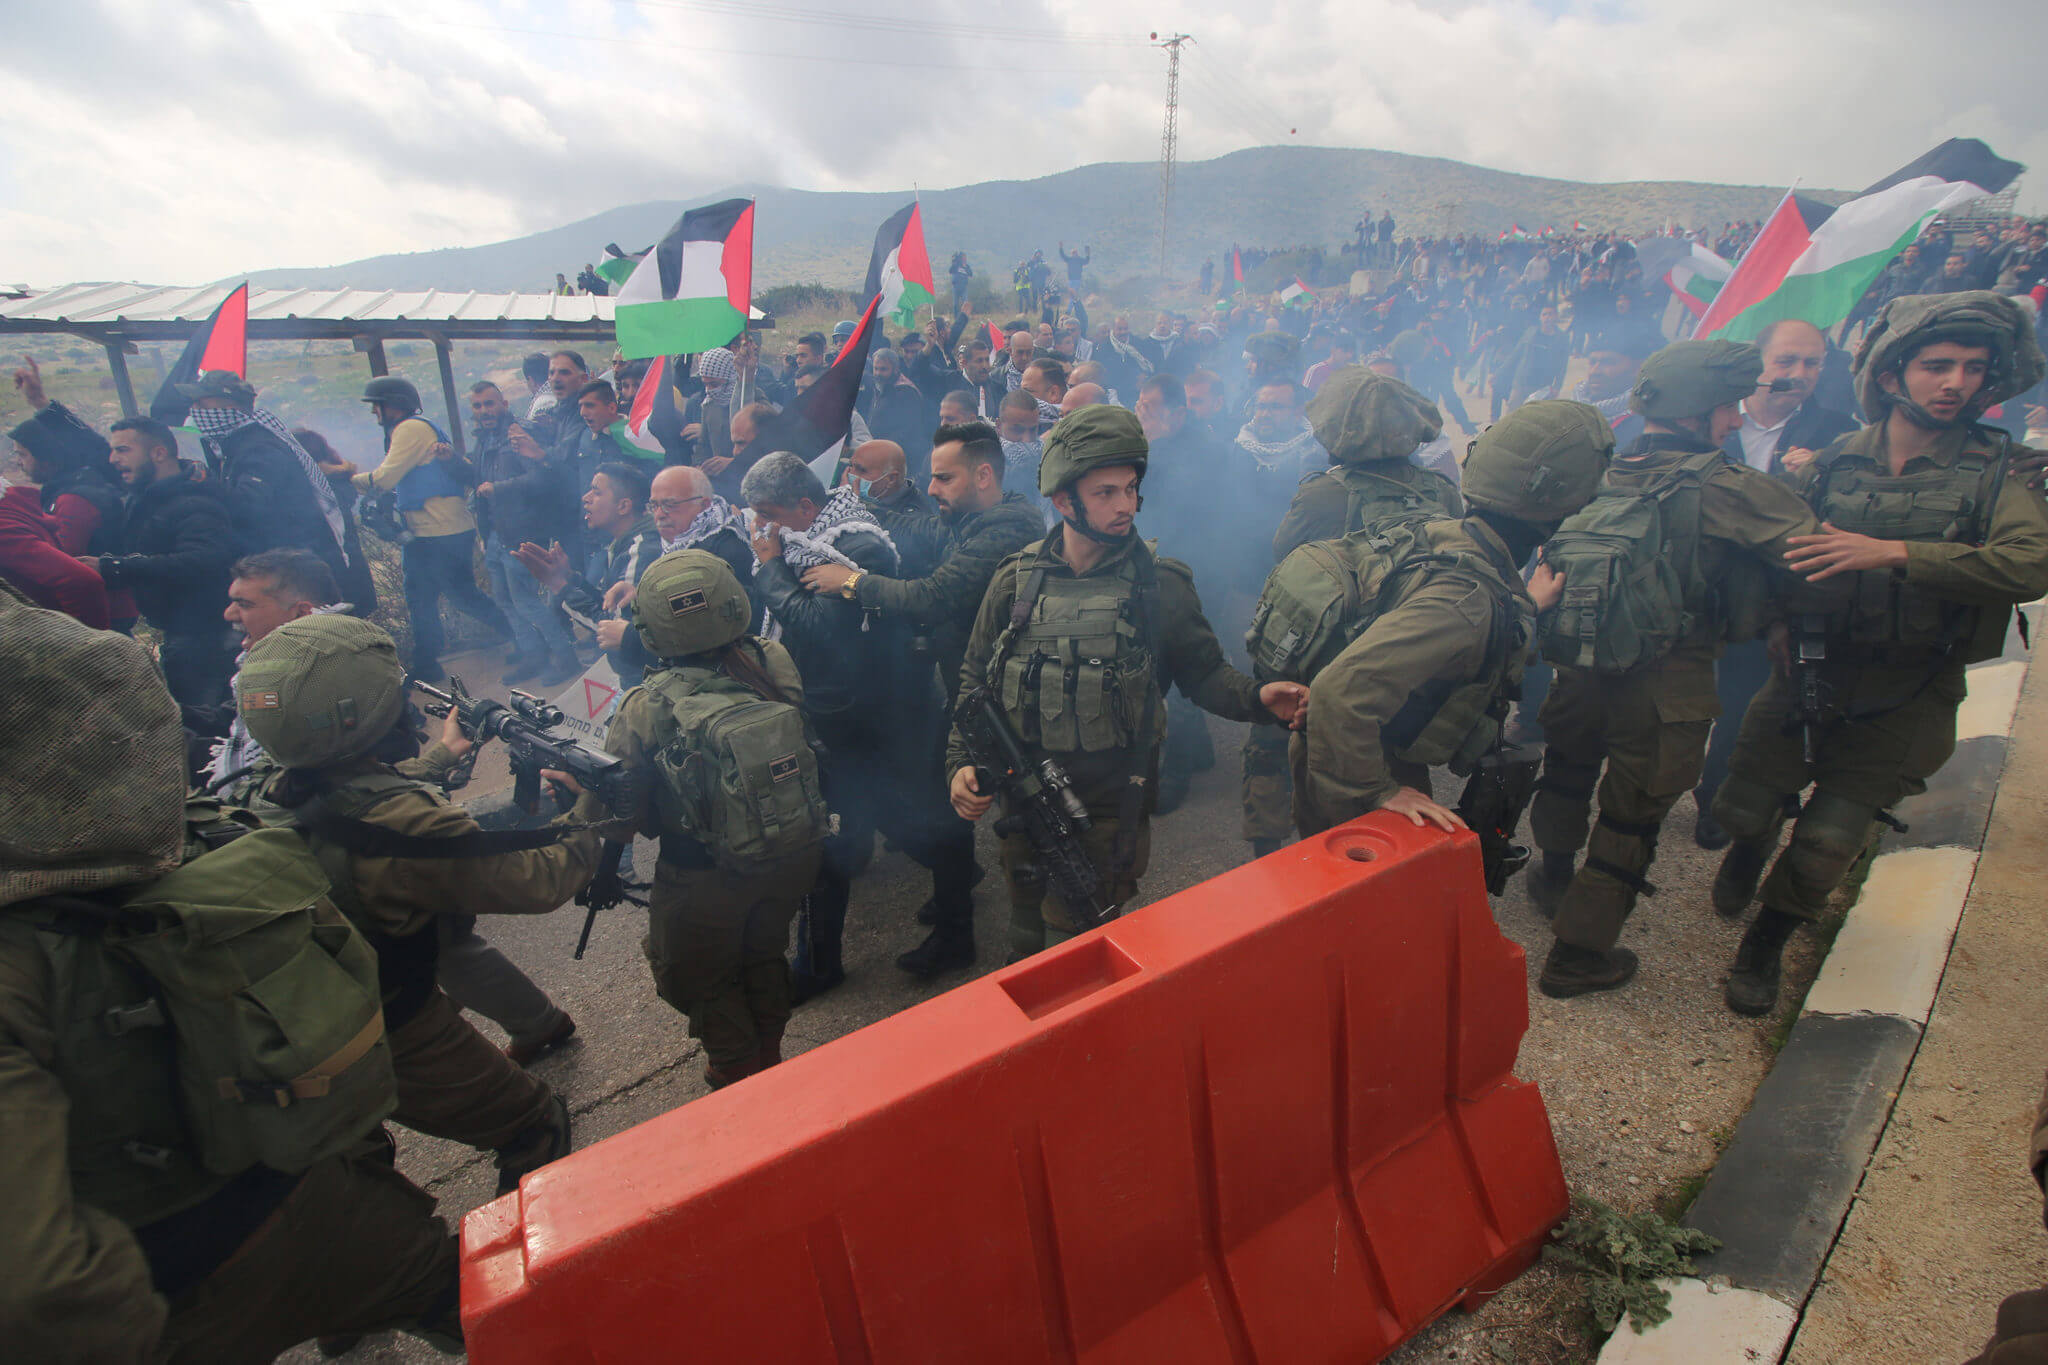 Israeli soldiers fire sound grenades at Palestinian protesters by the Tayseer checkpoint, the Jordan Valley, the West Bank, January 30, 2020. (Photo: Ahmad Al-Bazz / Activestills)